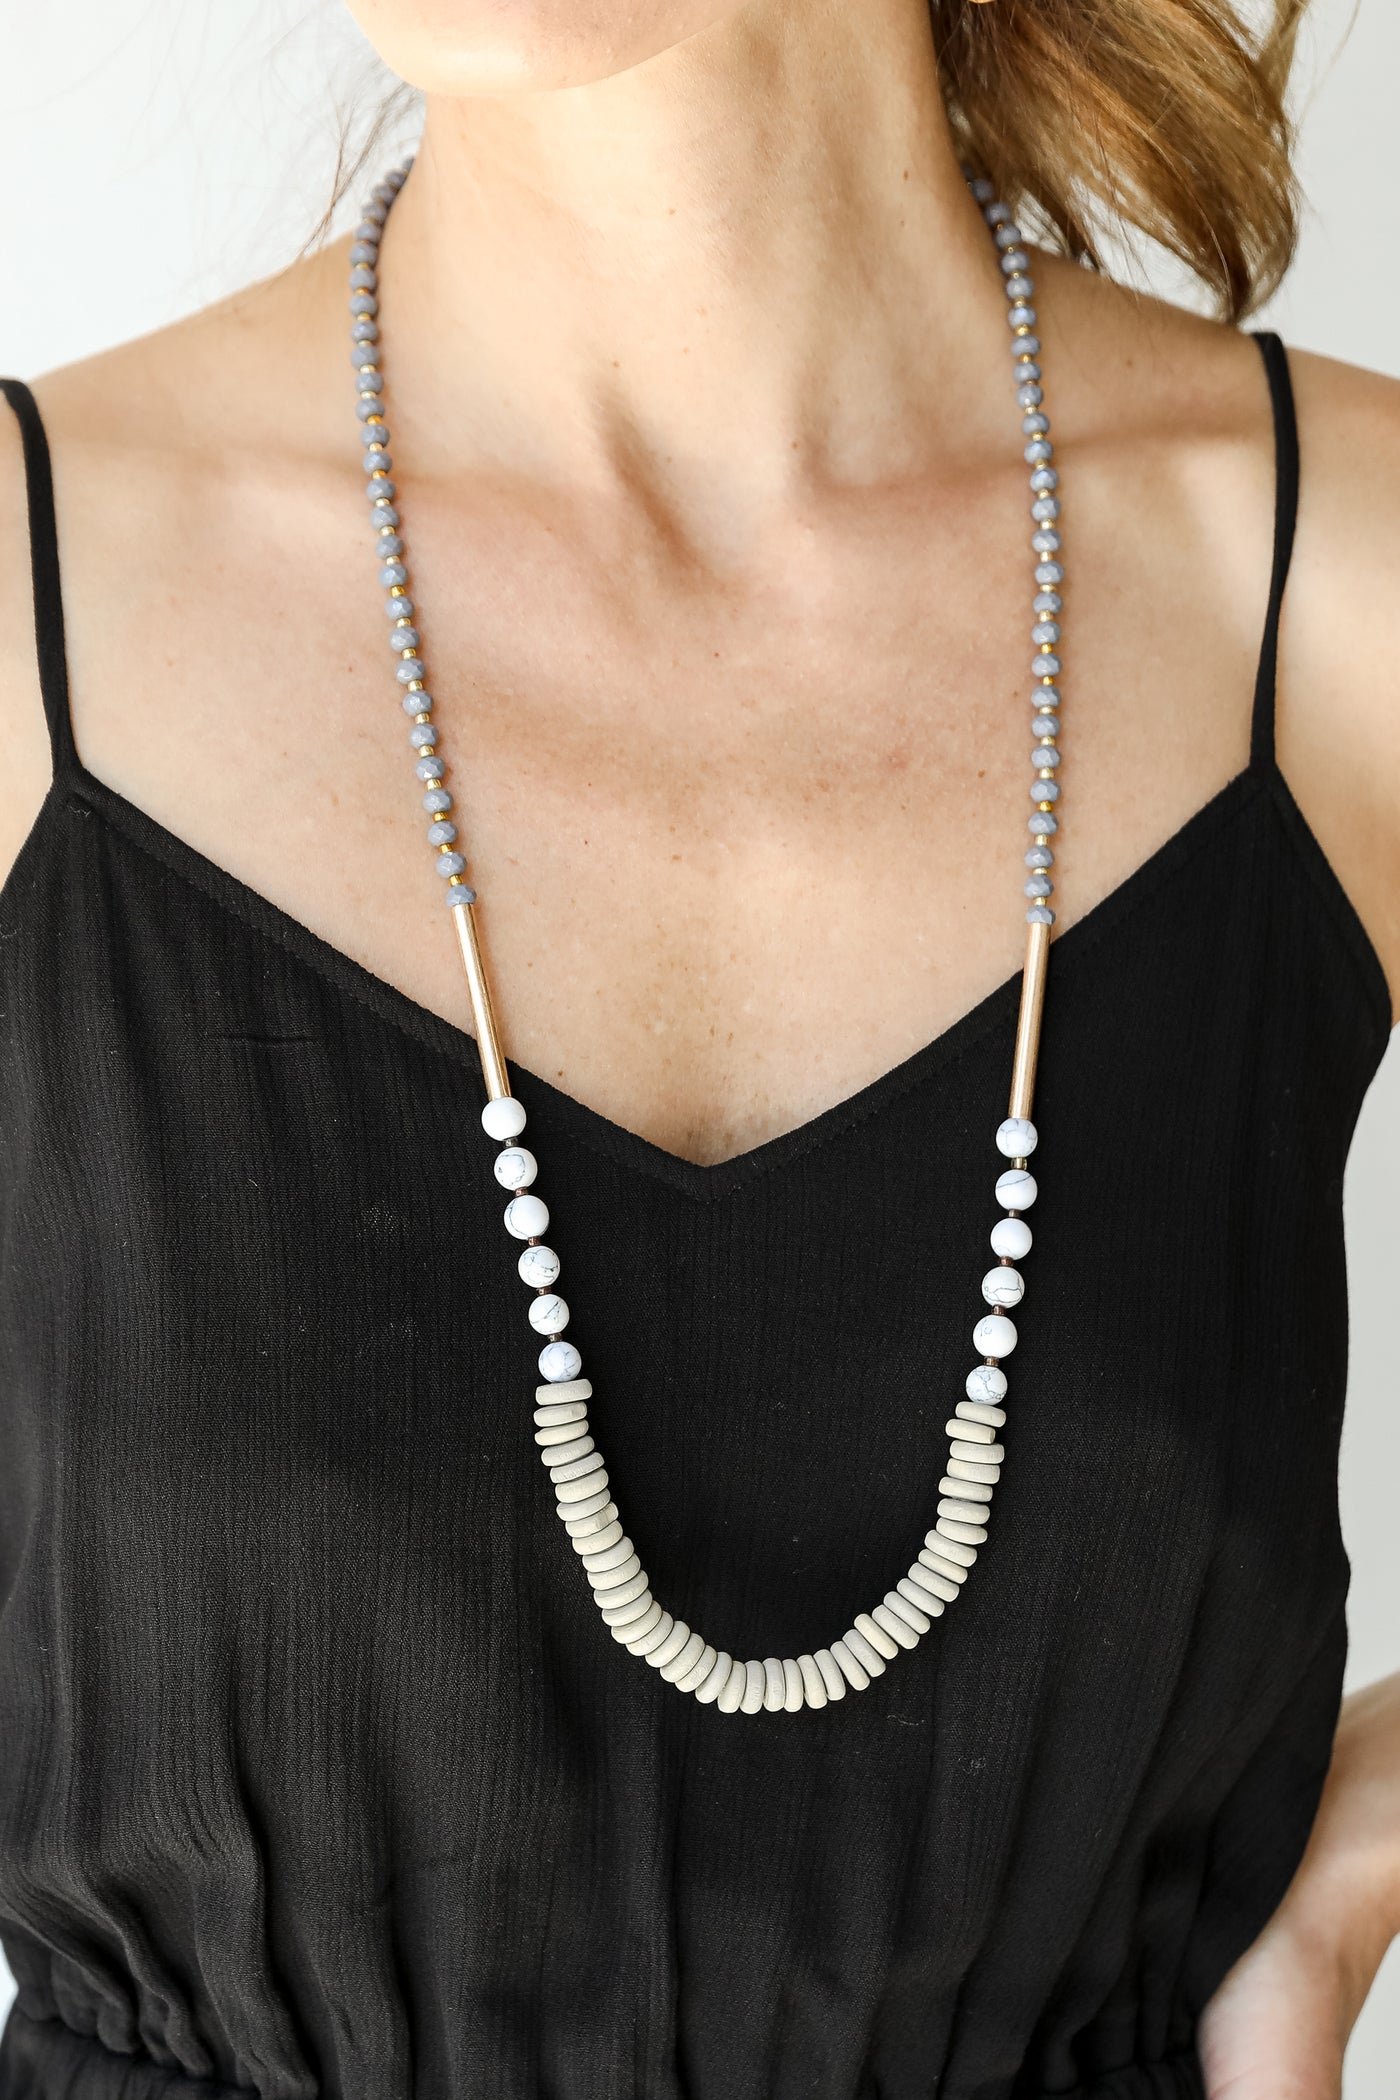 Beaded Necklace in grey